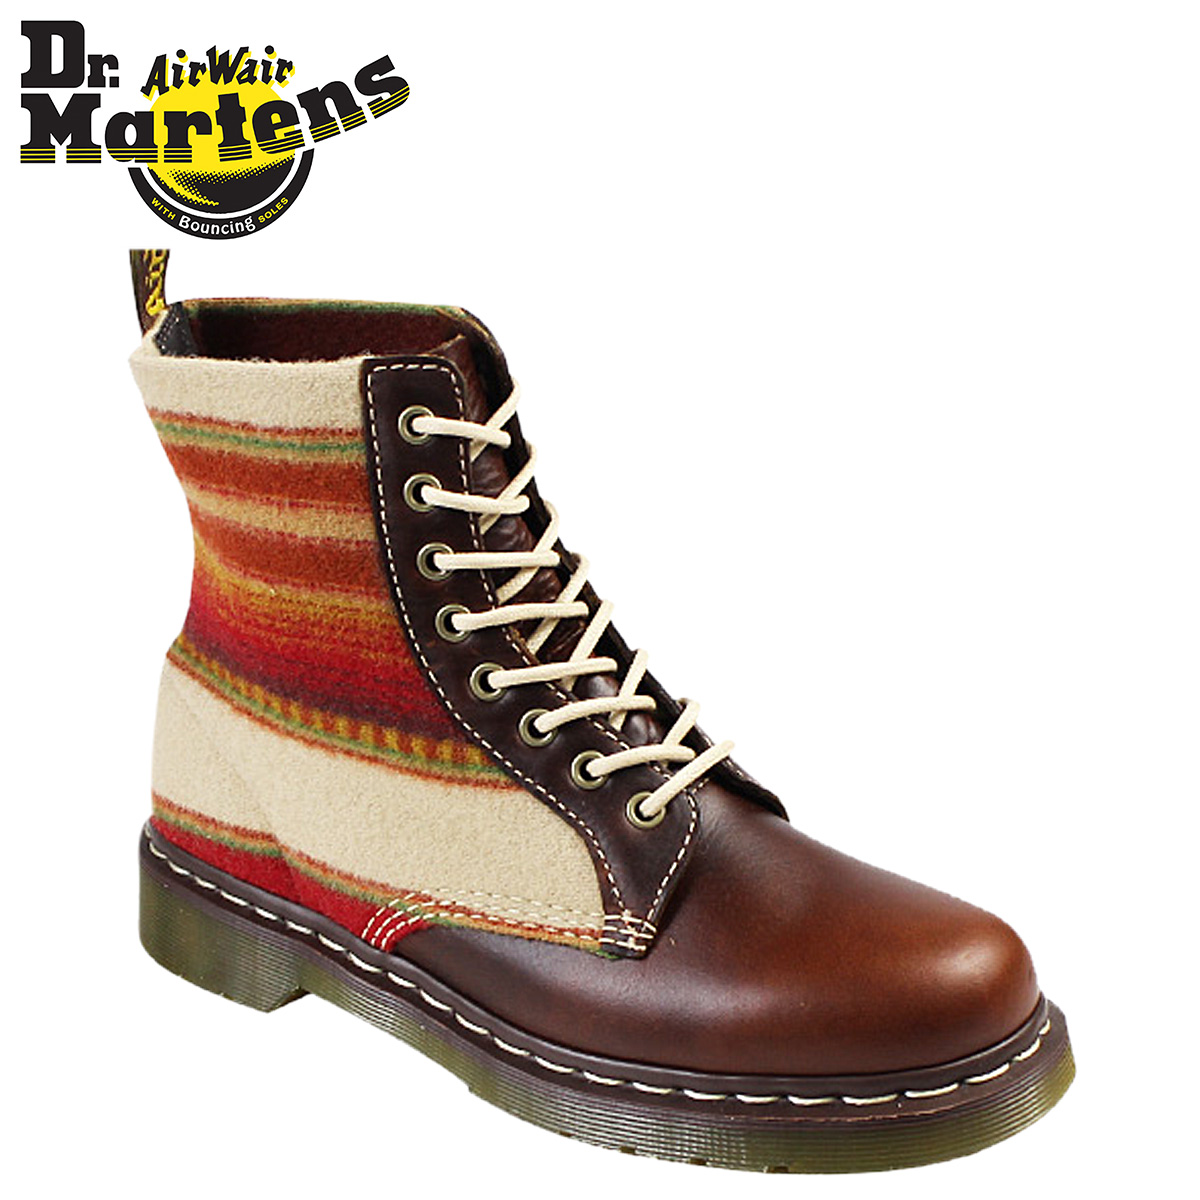 workers world boots